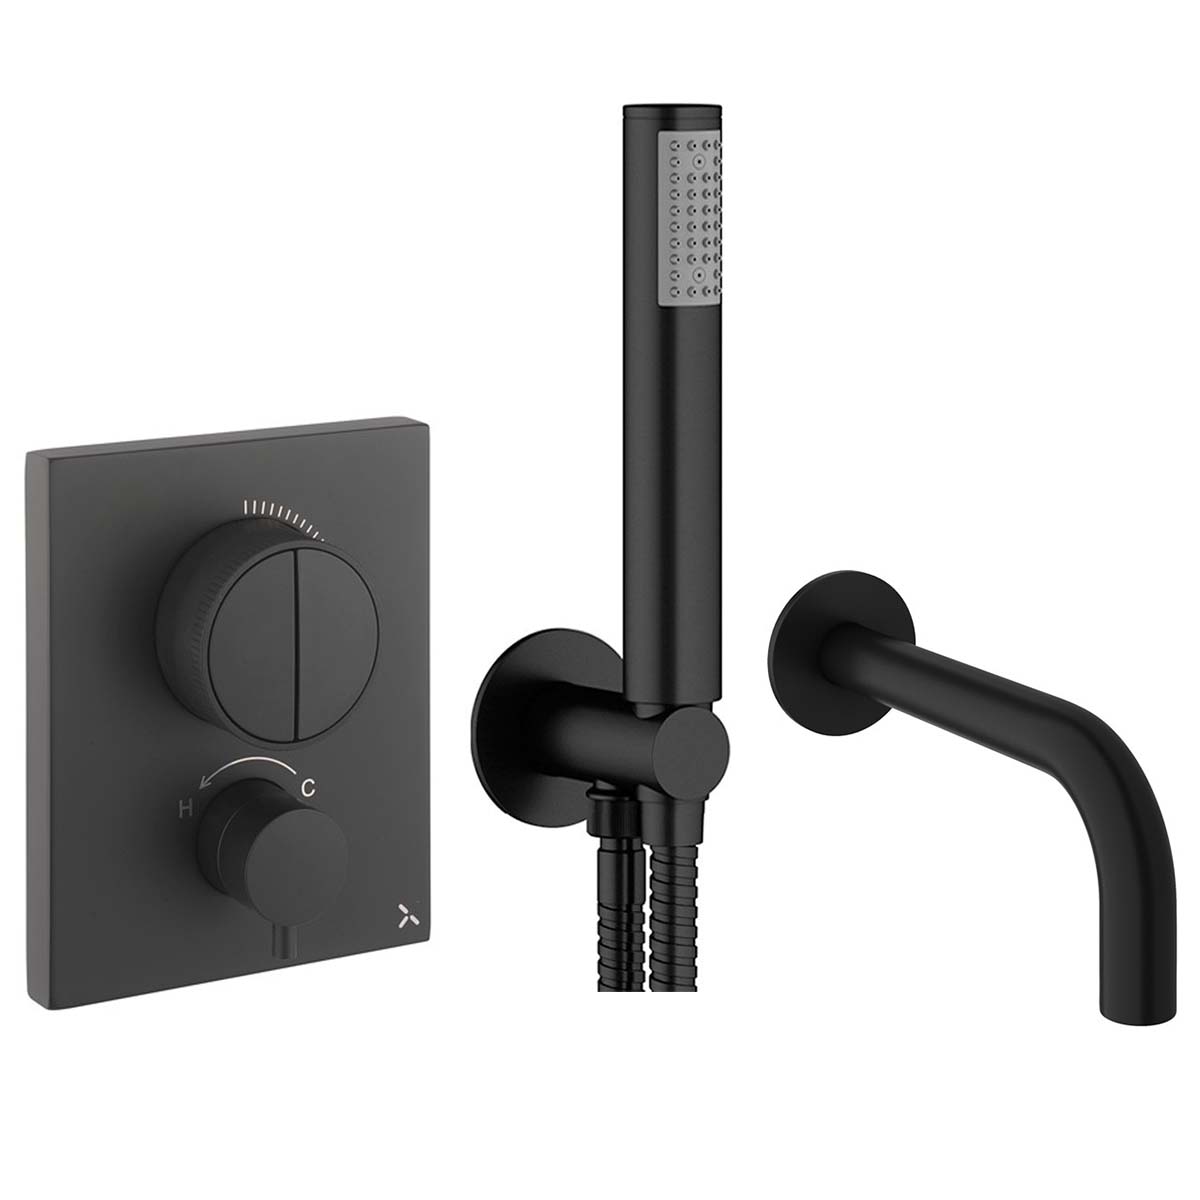 Crosswater MPRO Push Dual Outlet Thermostatic Shower Valve With Pencil Handset and Bath Spout Matt Black